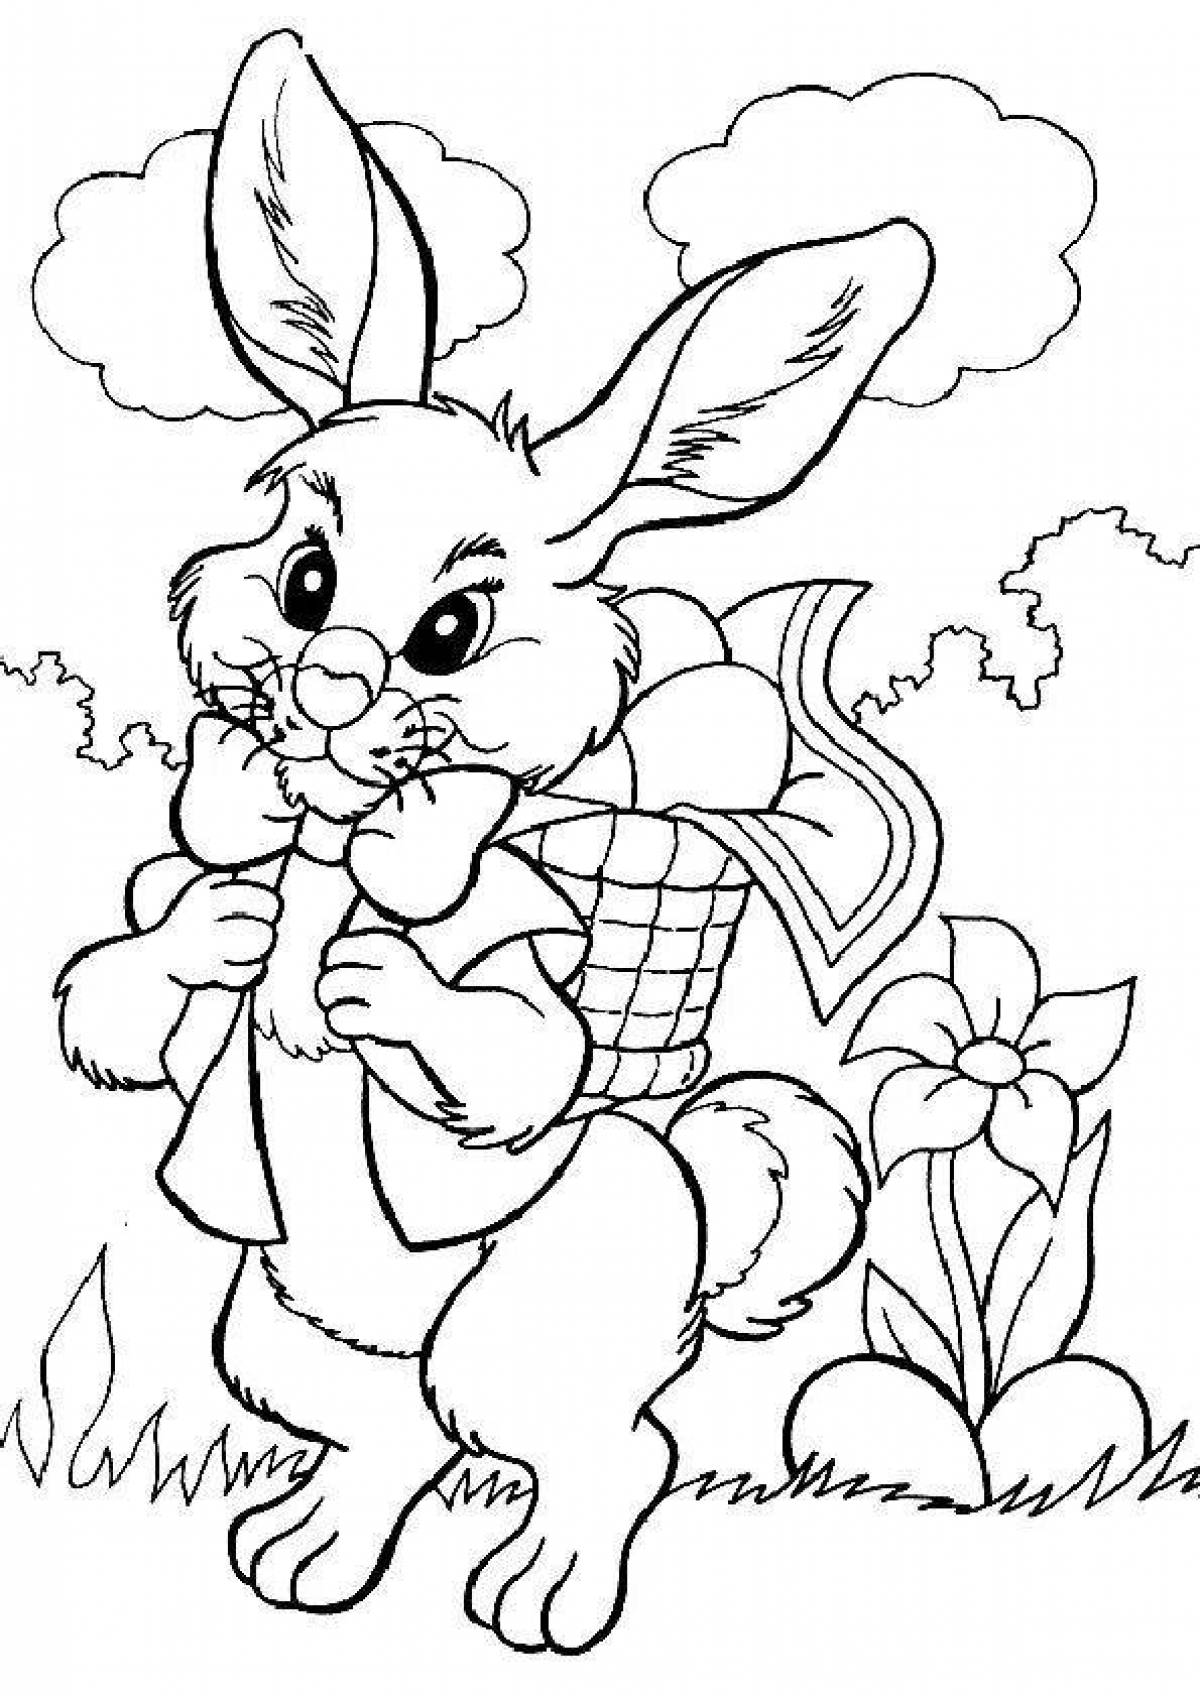 Coloring book happy hare for children 6-7 years old